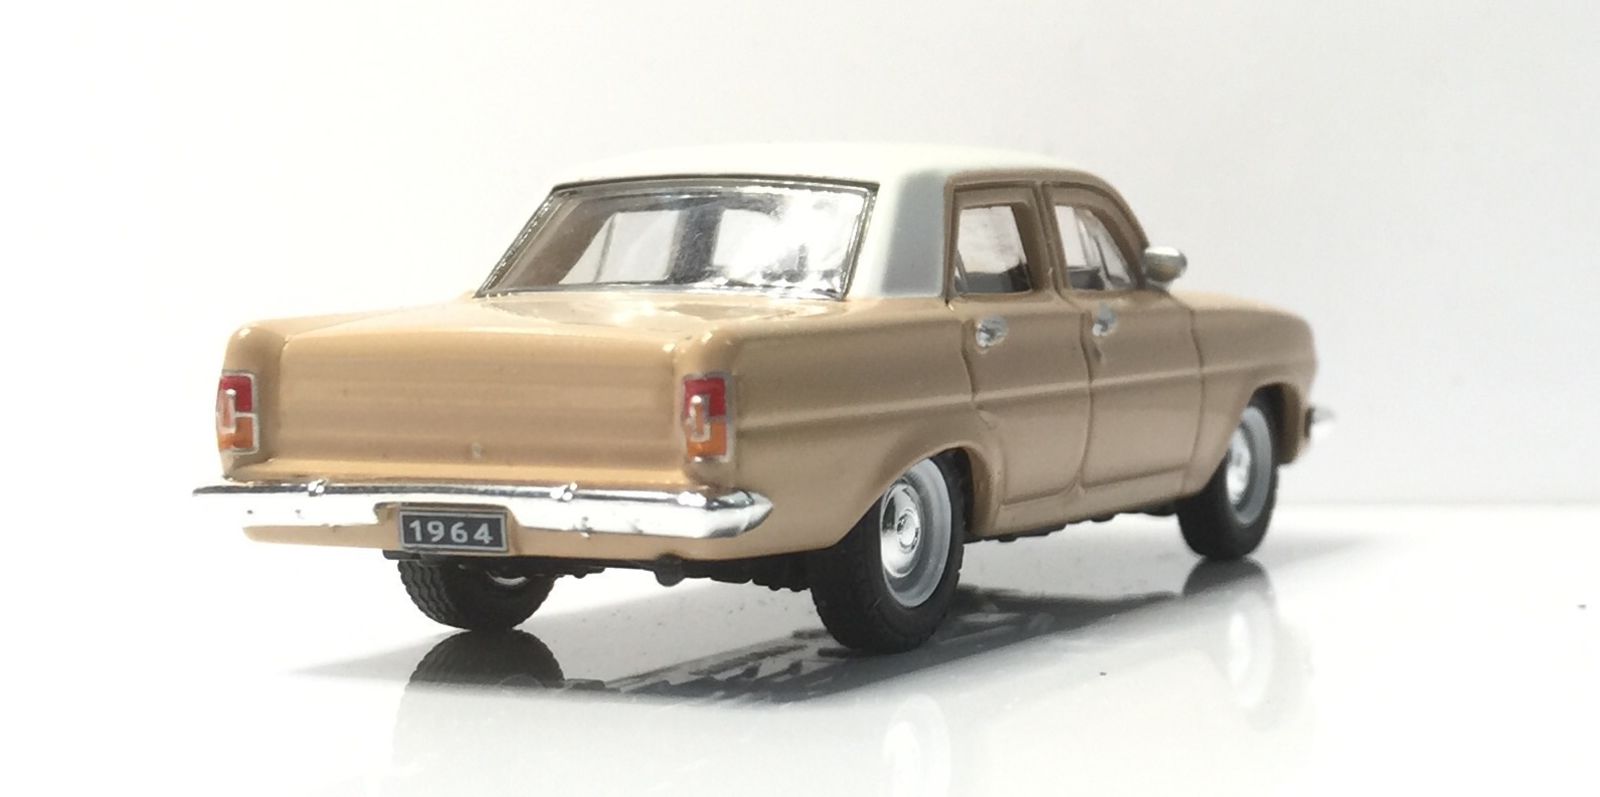 Illustration for article titled 1964 EH Holden in 1:64